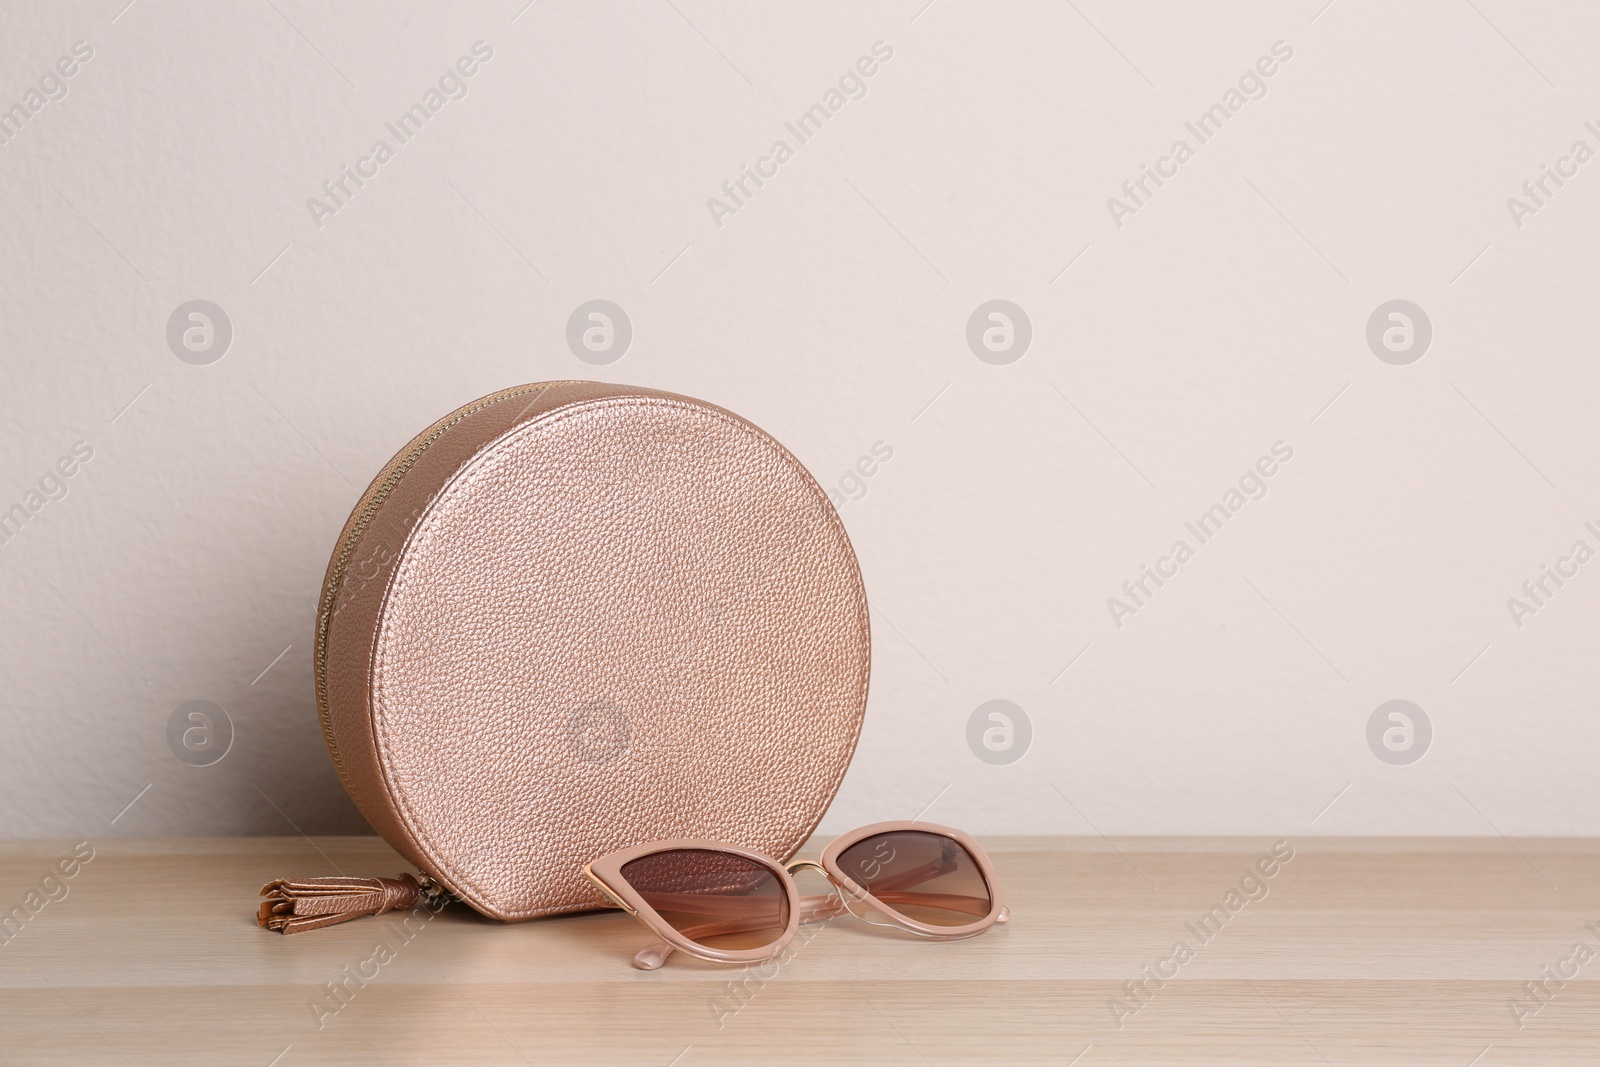 Photo of Stylish woman's bag and sunglasses on wooden table. Space for text